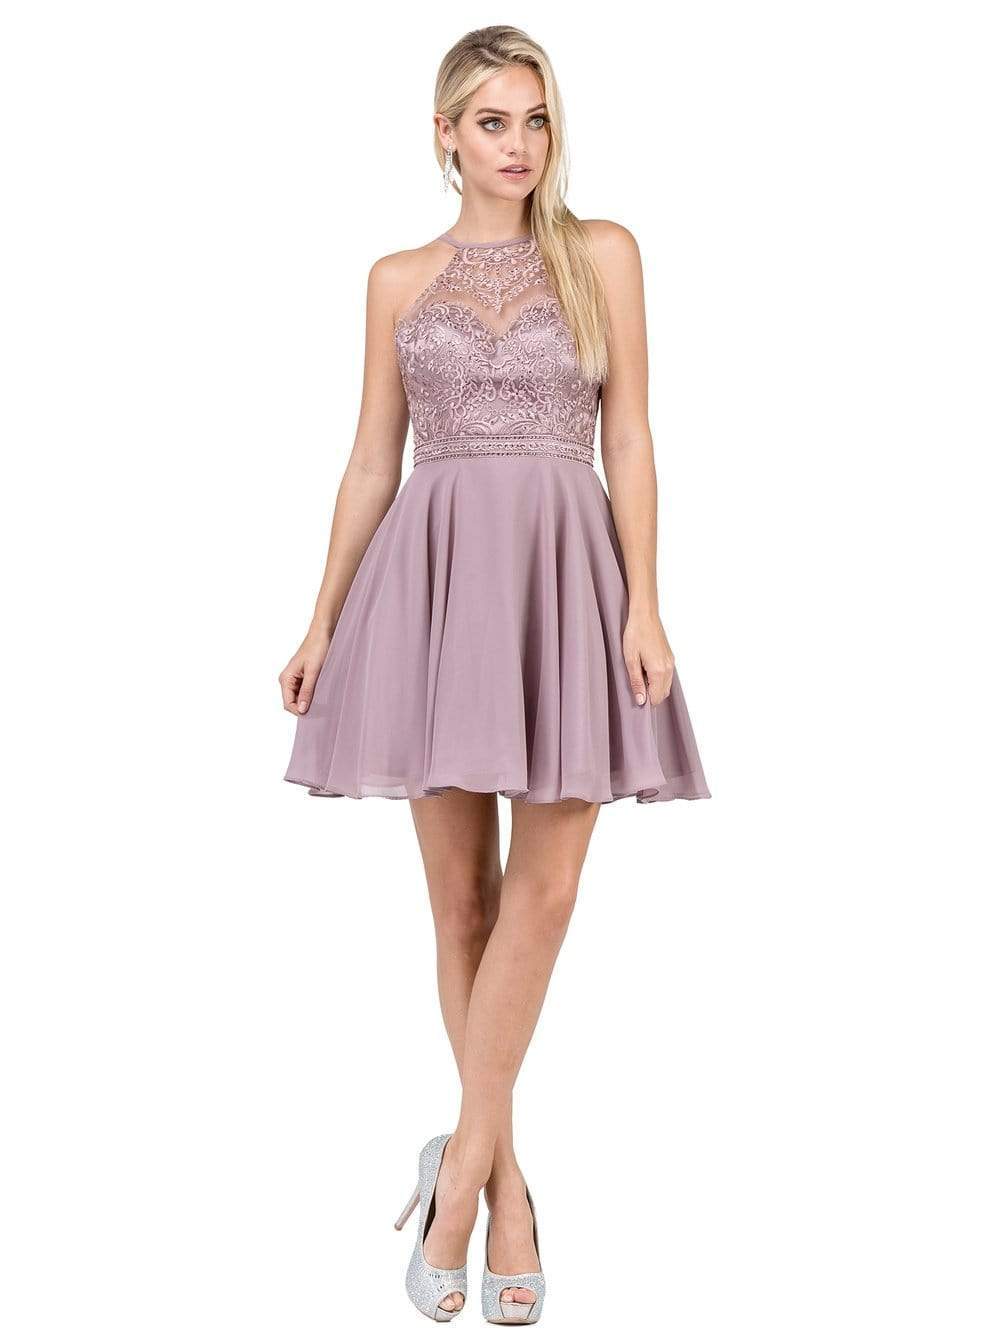 Dancing Queen - 3008 High Halter Embroidered Lace Homecoming Dress Homecoming Dresses XS / Mocha